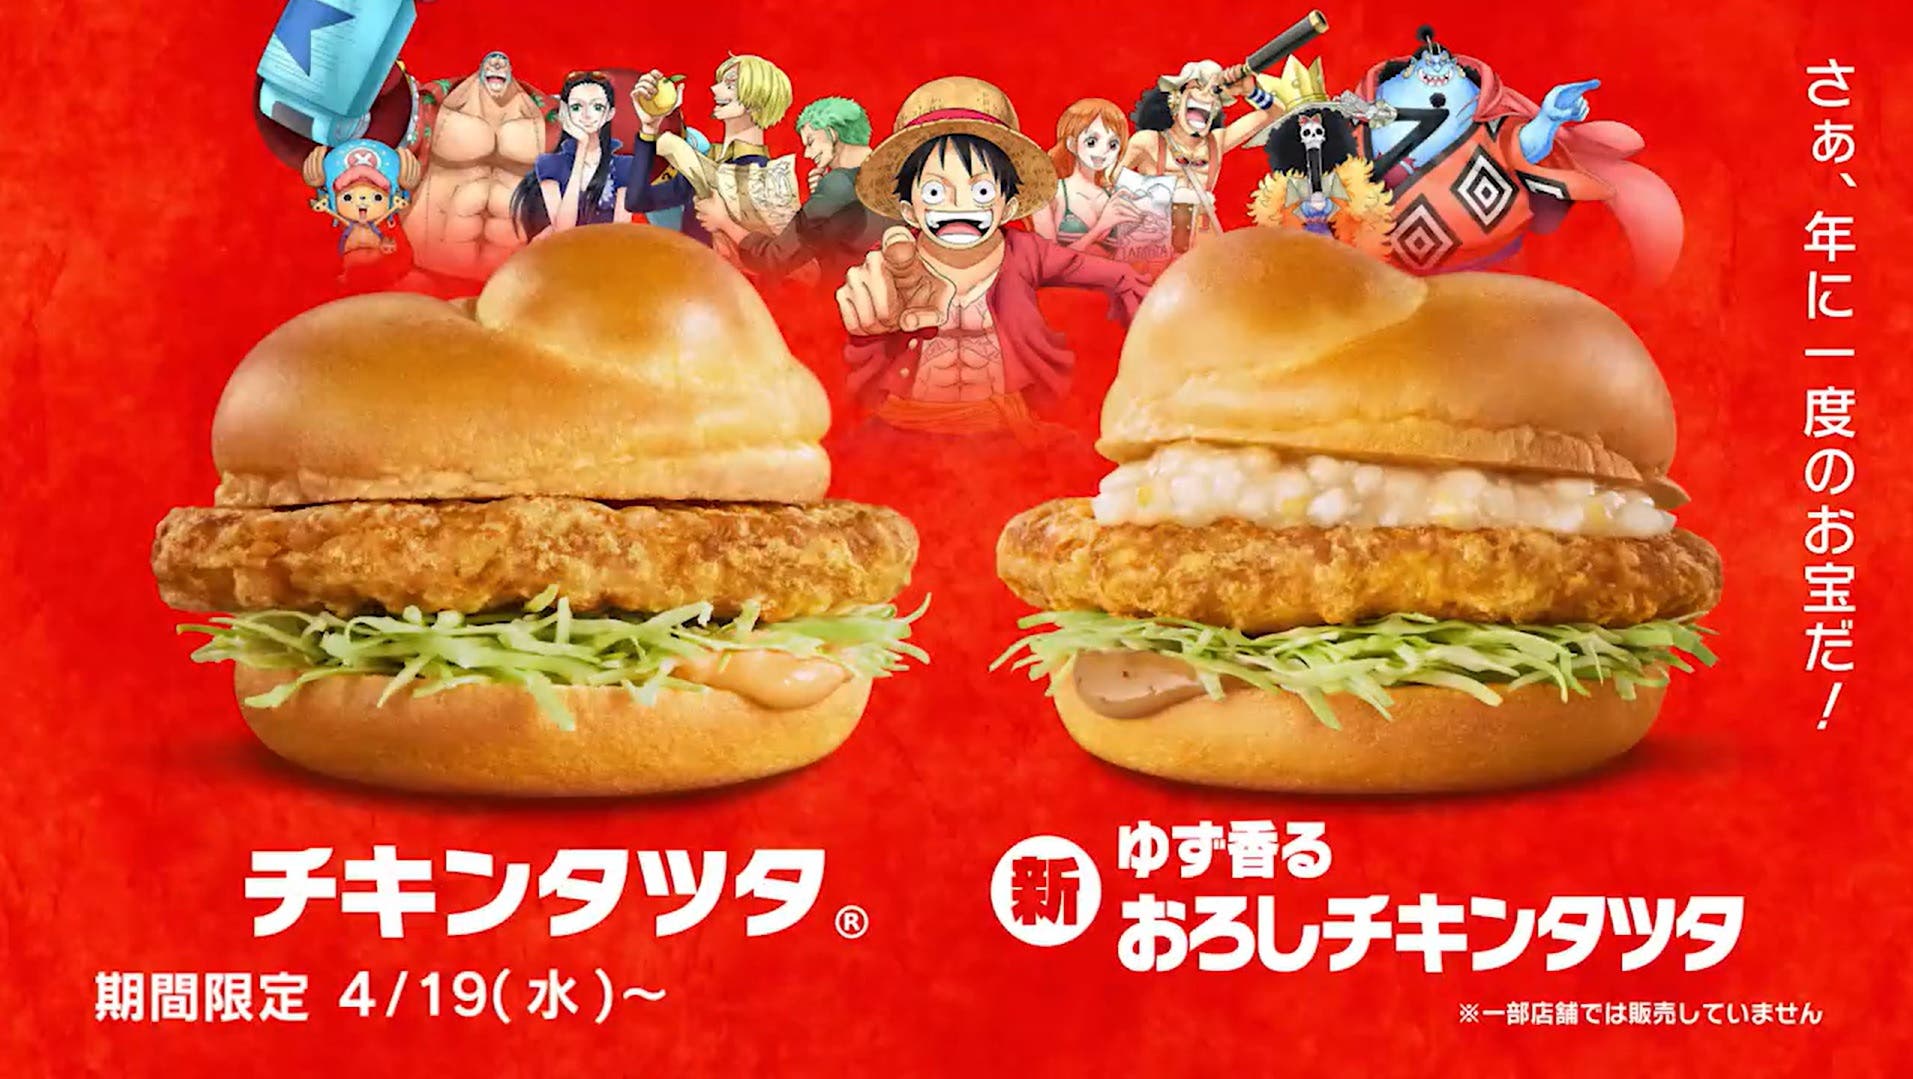 One Piece Announces Collaboration With McDonald’s, And You Can’t Miss The Announcement